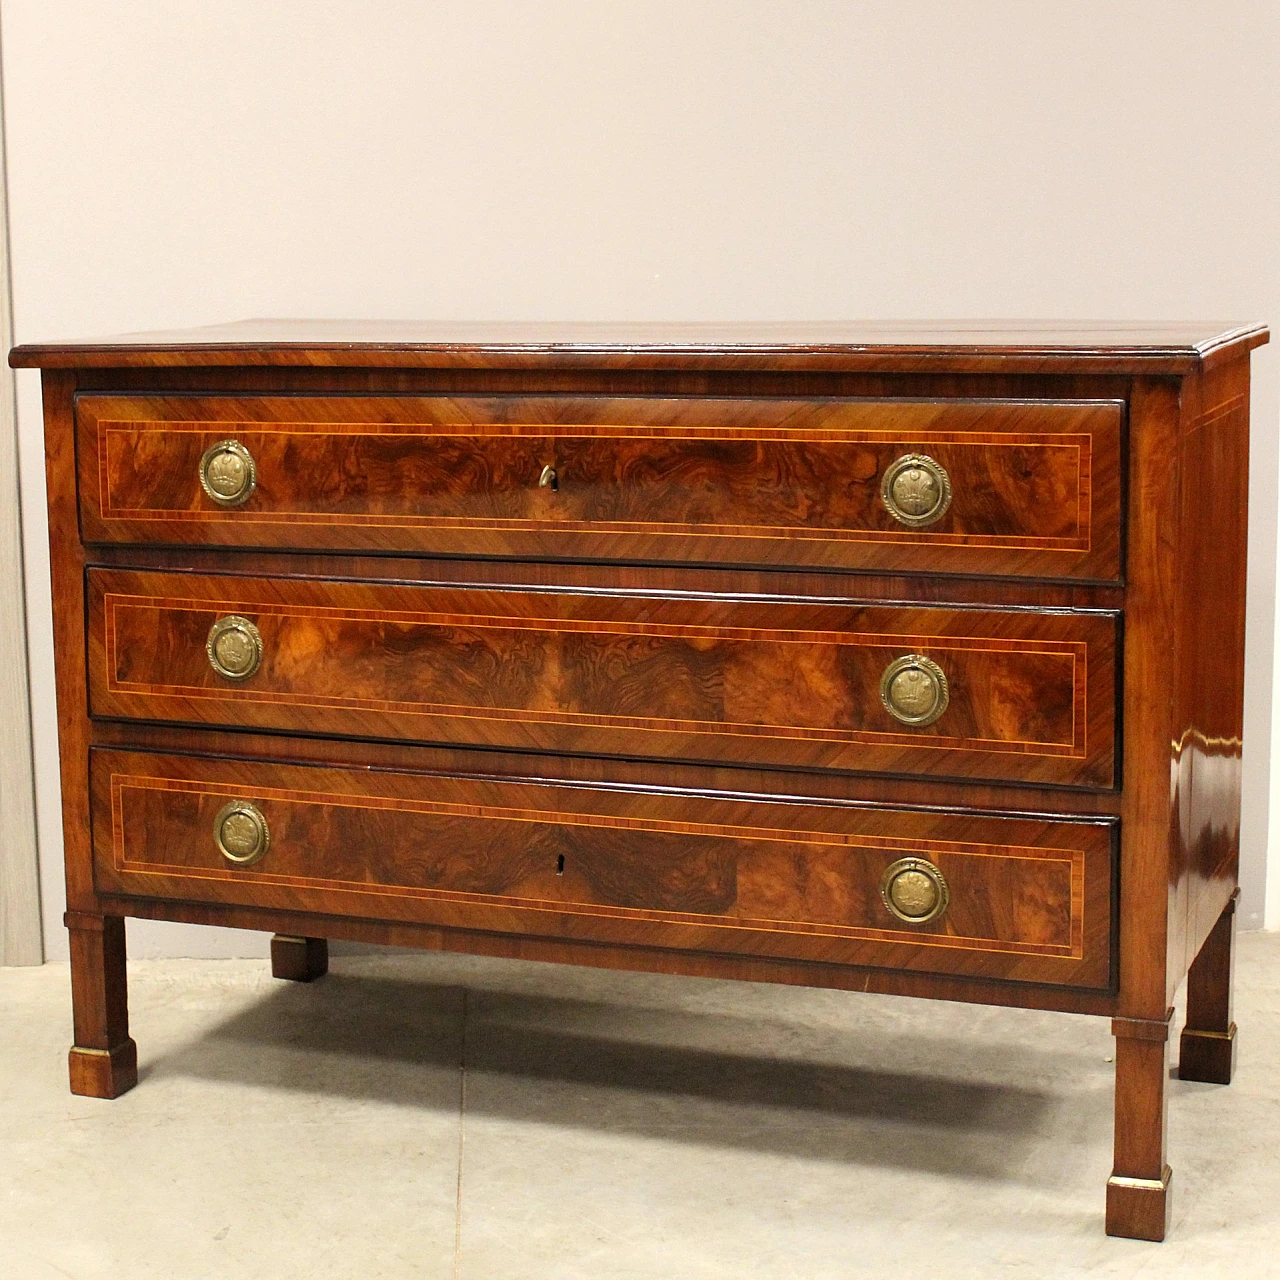 Bolognese Empire solid walnut commode, early 19th century 11